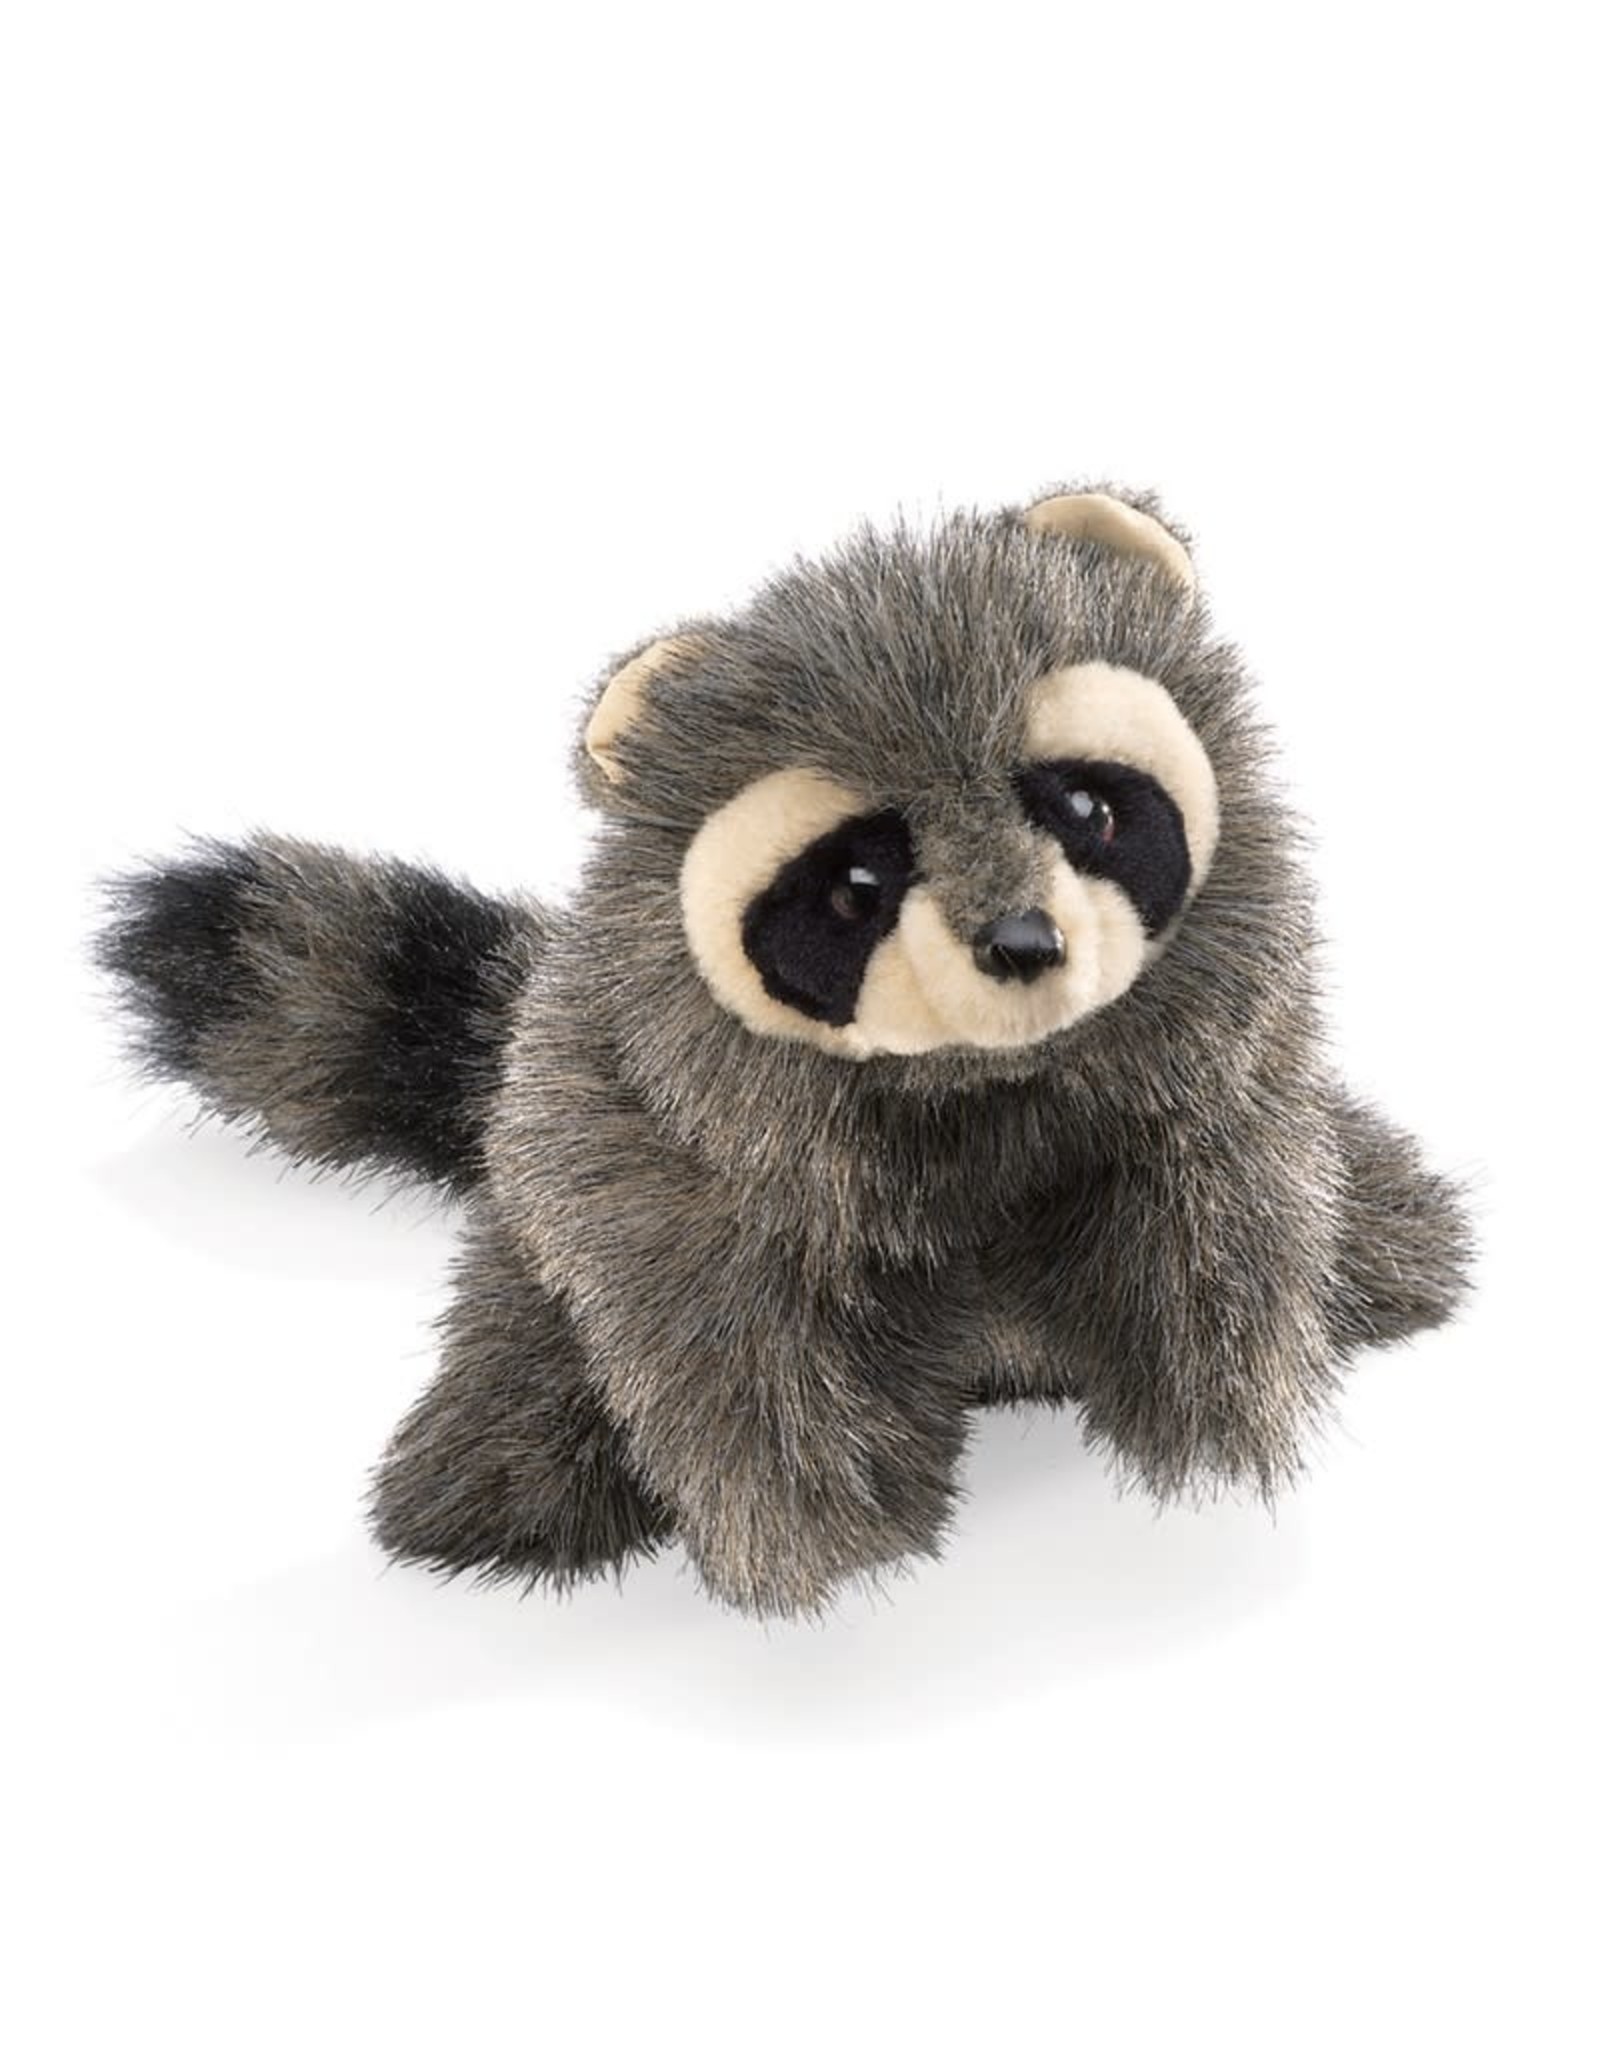 Folkmanis Puppets Baby Raccoon